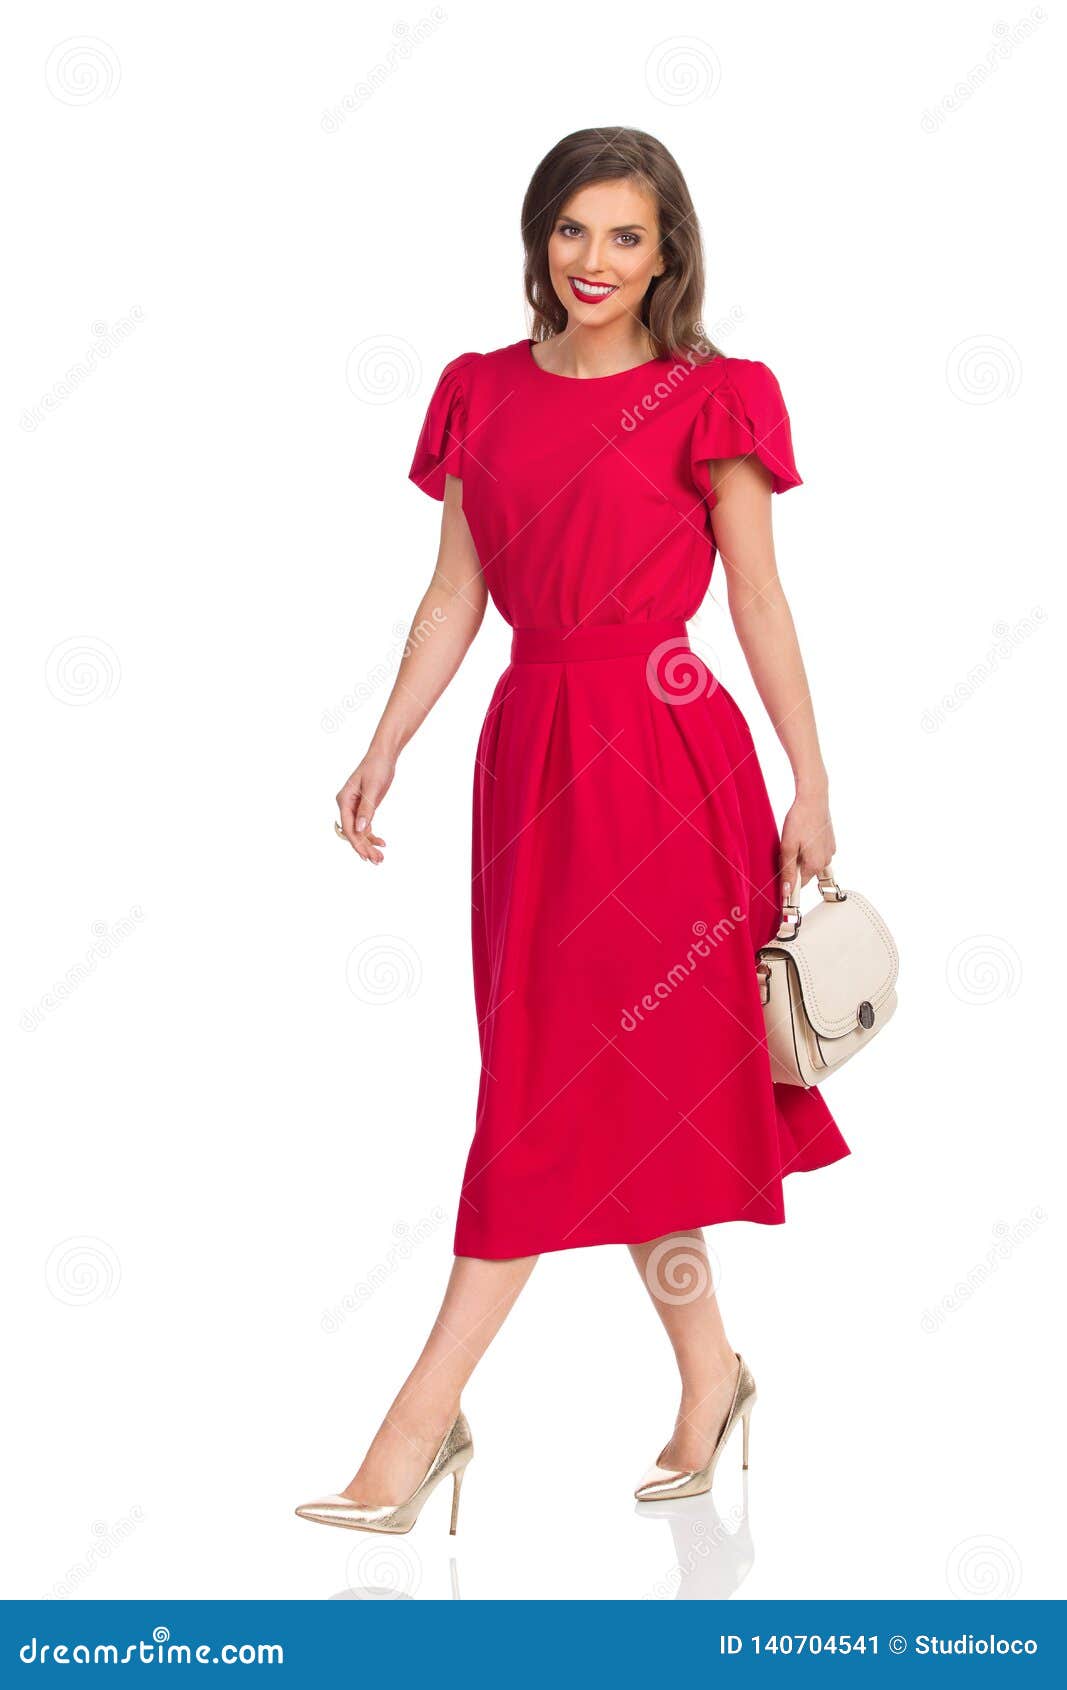 Smiling Woman in Red Dress, Gold High Heels and Beige Purse is Walking ...